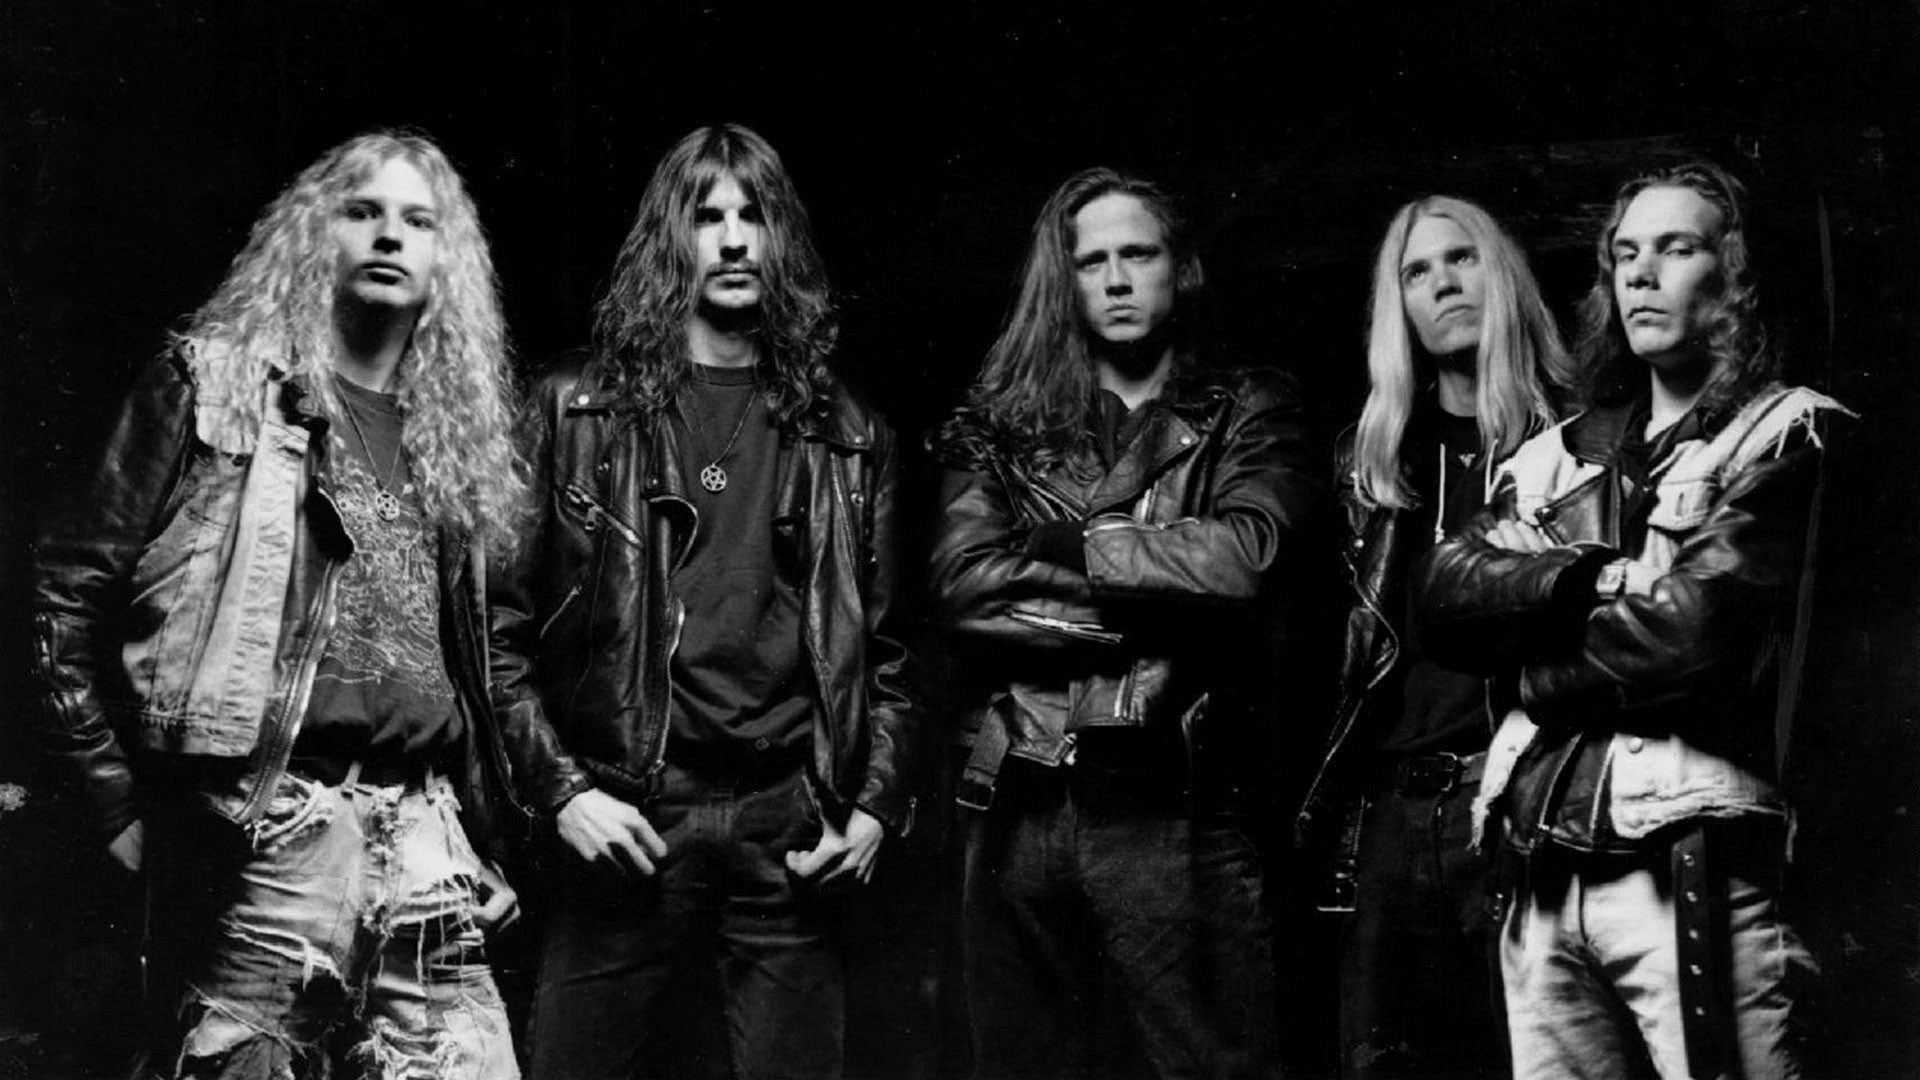 25 Years Ago: SEANCE release Fornever Laid to Rest on Black Mark (Swedish Death Metal)